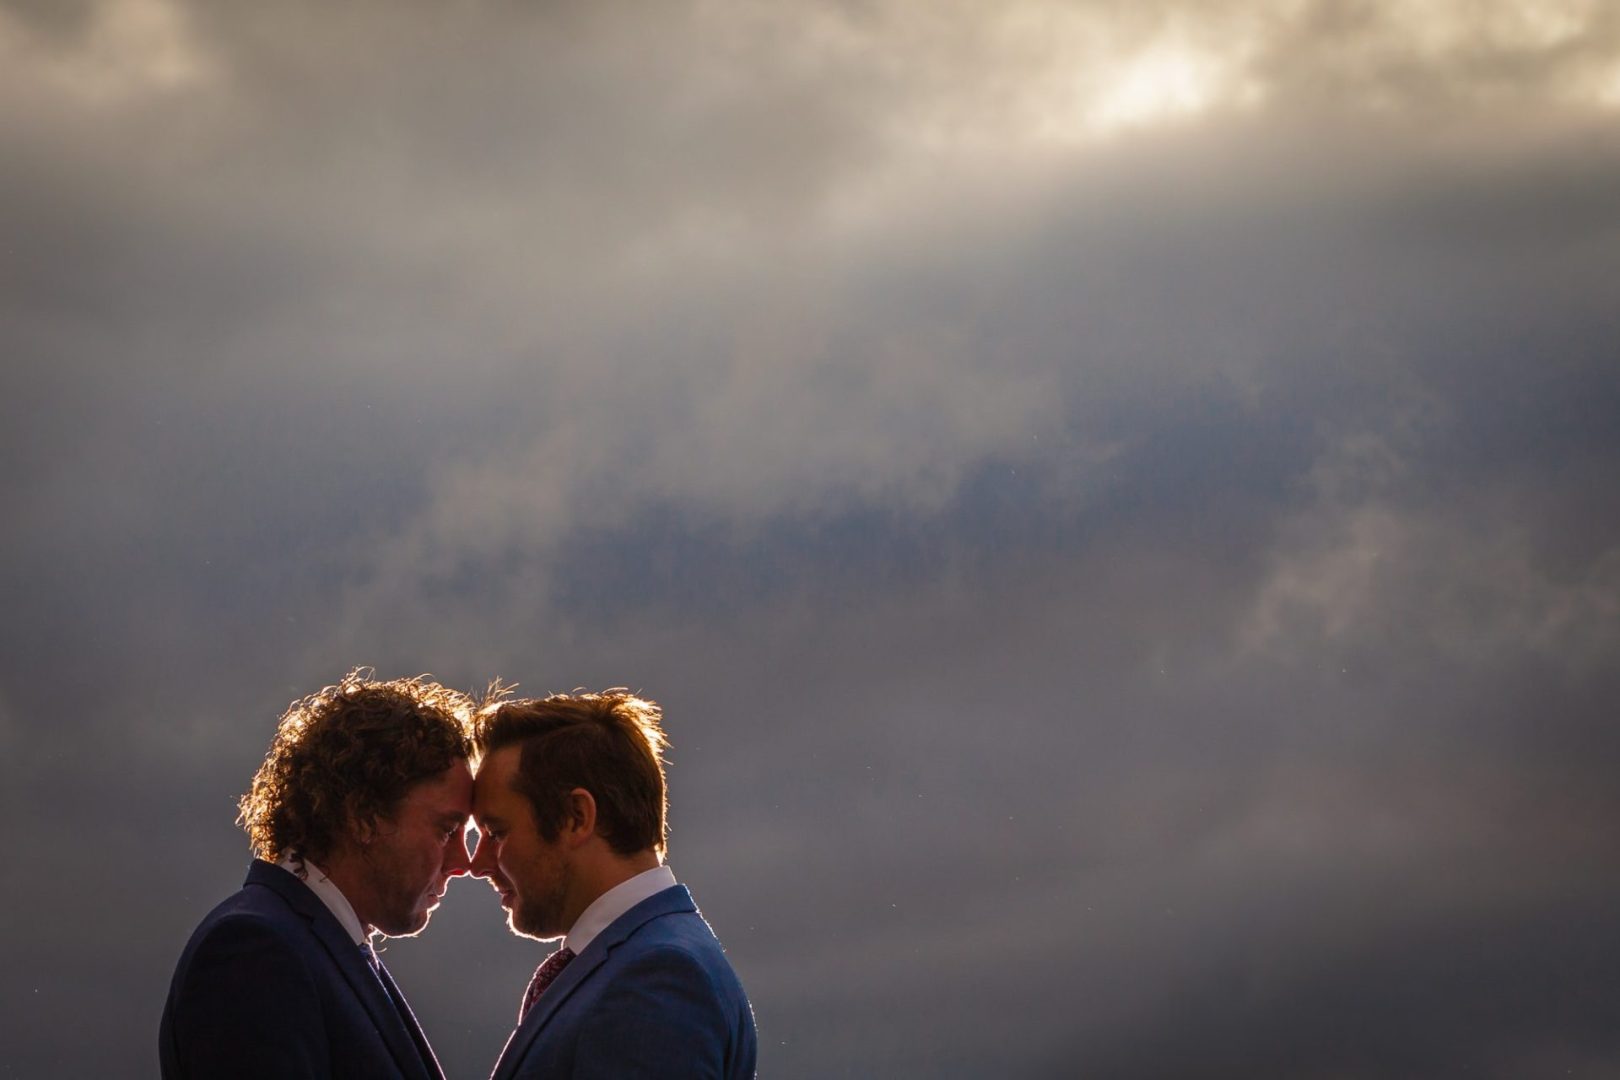 Two grooms heads together under a cloudy sky